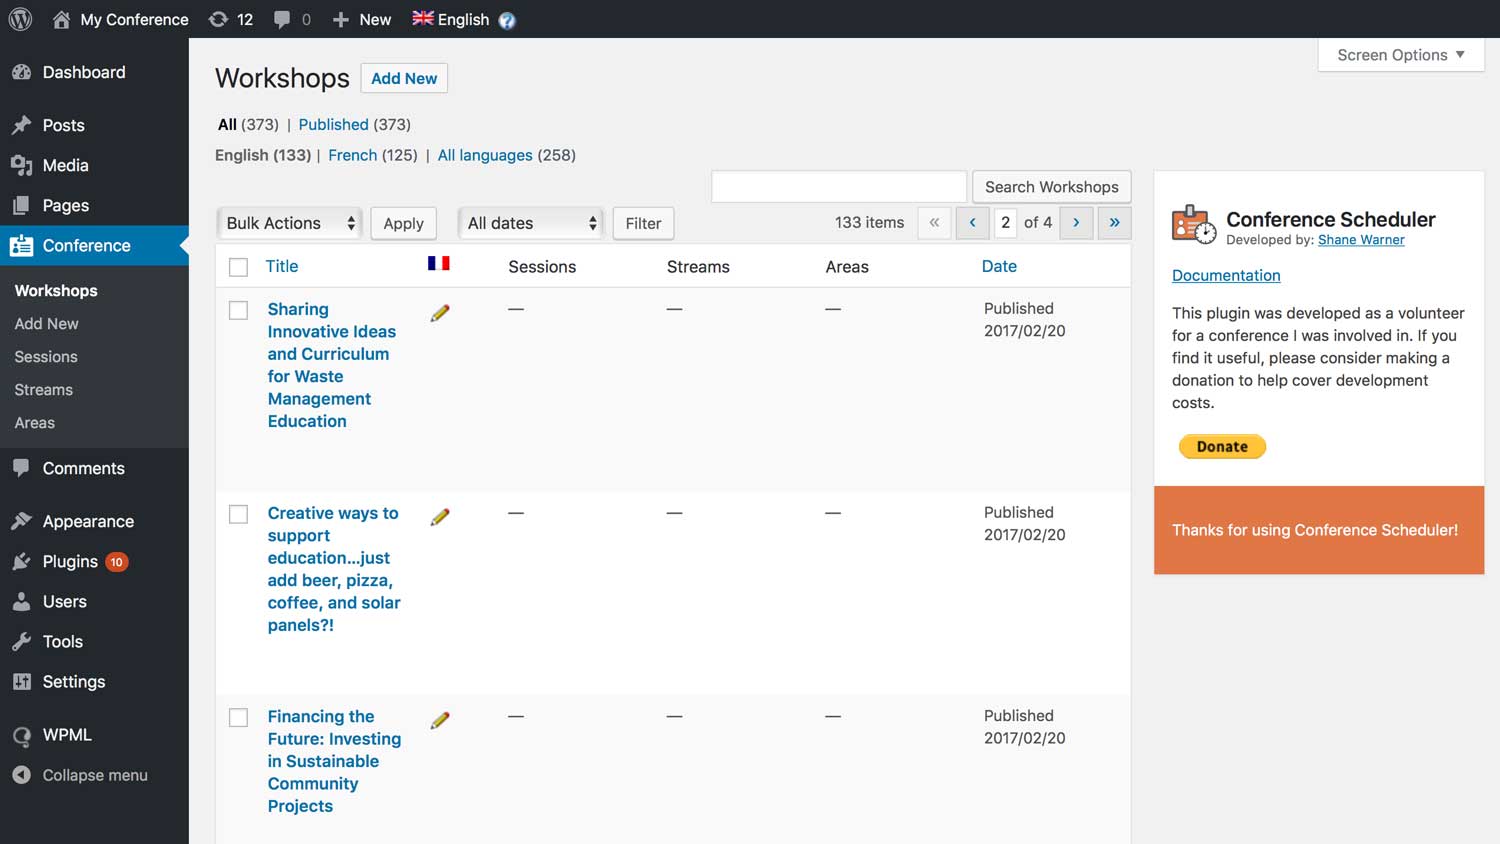 Manage all your workshops in the familiar WordPress admin interface.